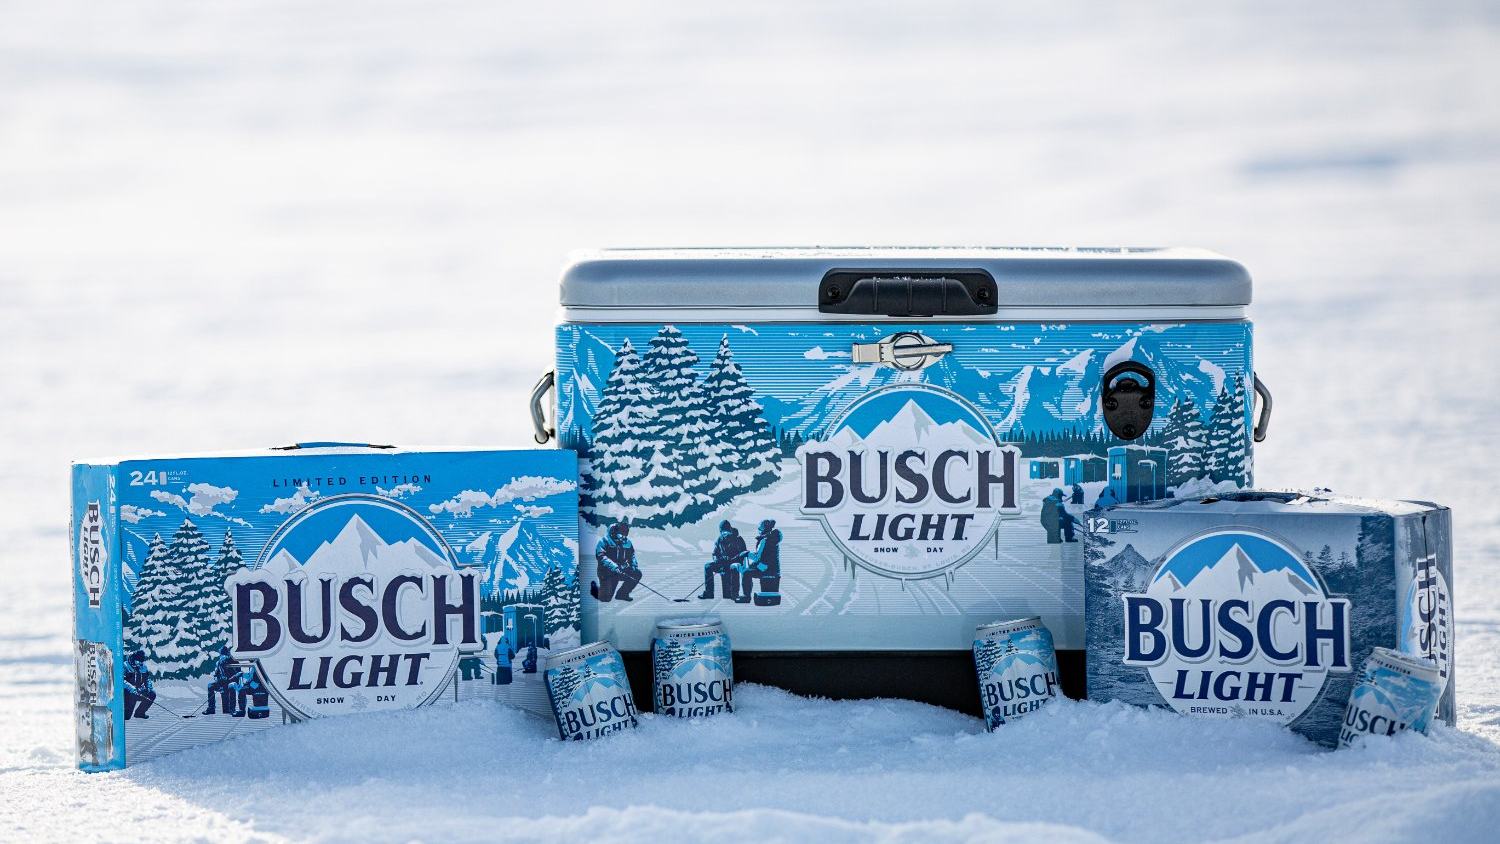 Busch Light's Latest Packaging and Promo Inspired By Ice Fishing